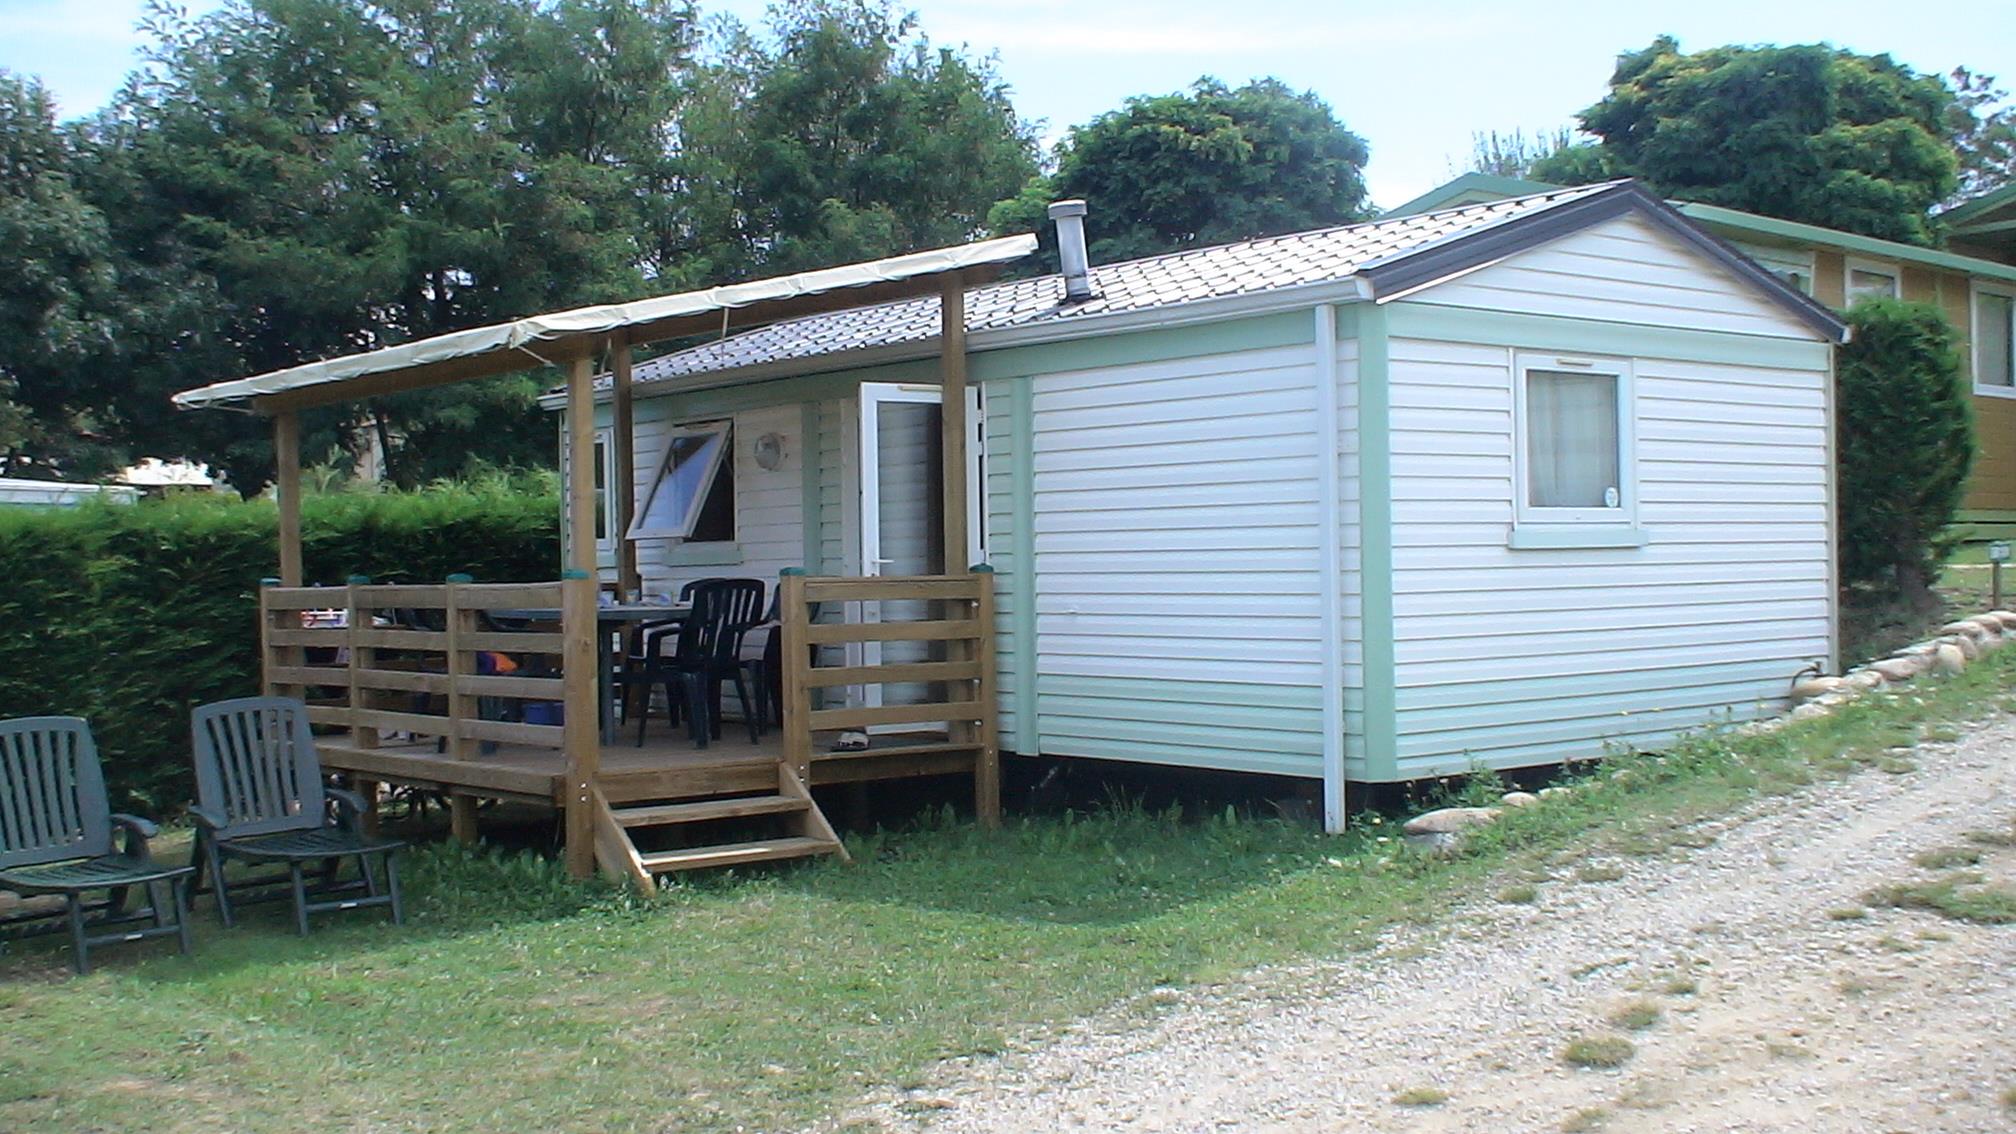 Accommodation - Mobile Home Standard 27M²  (2 Bedrooms)  + Covered Terrace - Flower Camping La Chataigneraie